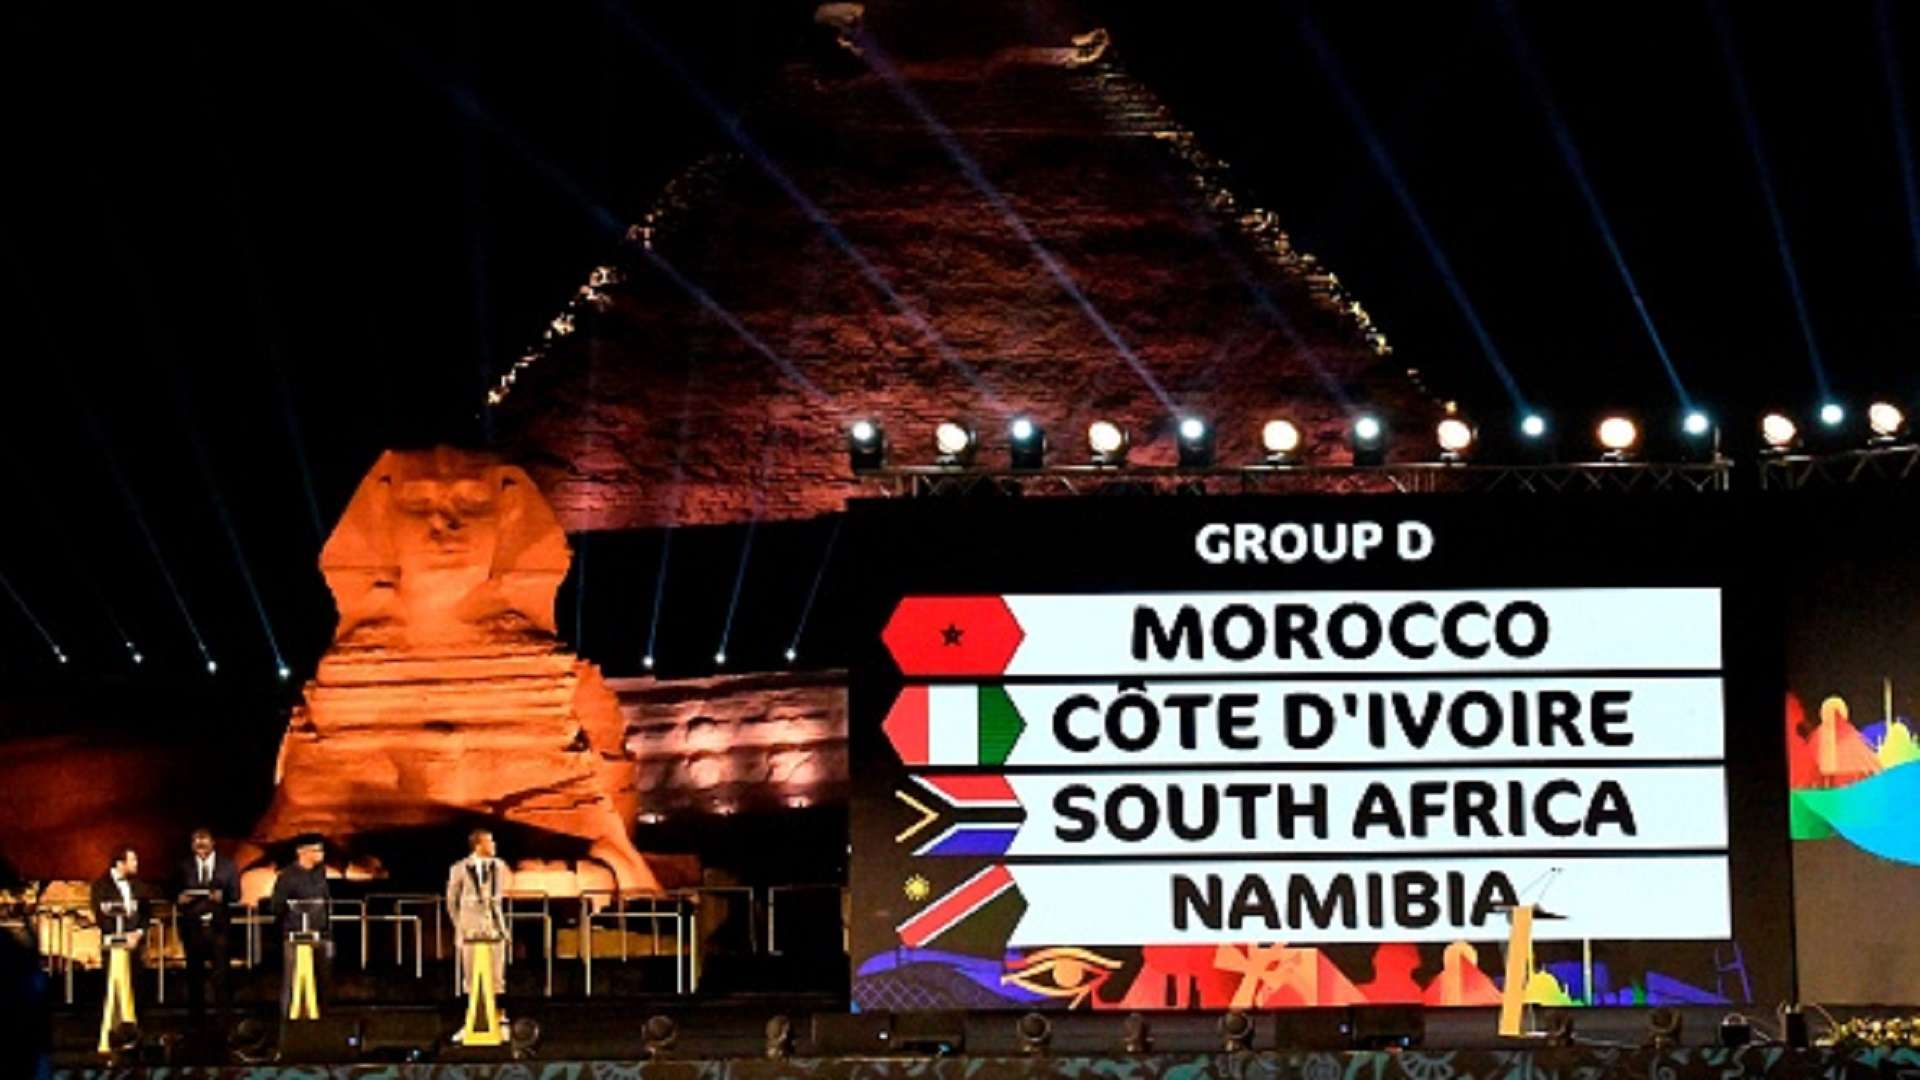 prior to the 2019 CAF African Cup of Nations (CAN) draw shows a view of the draw venue with the Pyramid of Khafre 12 April2019